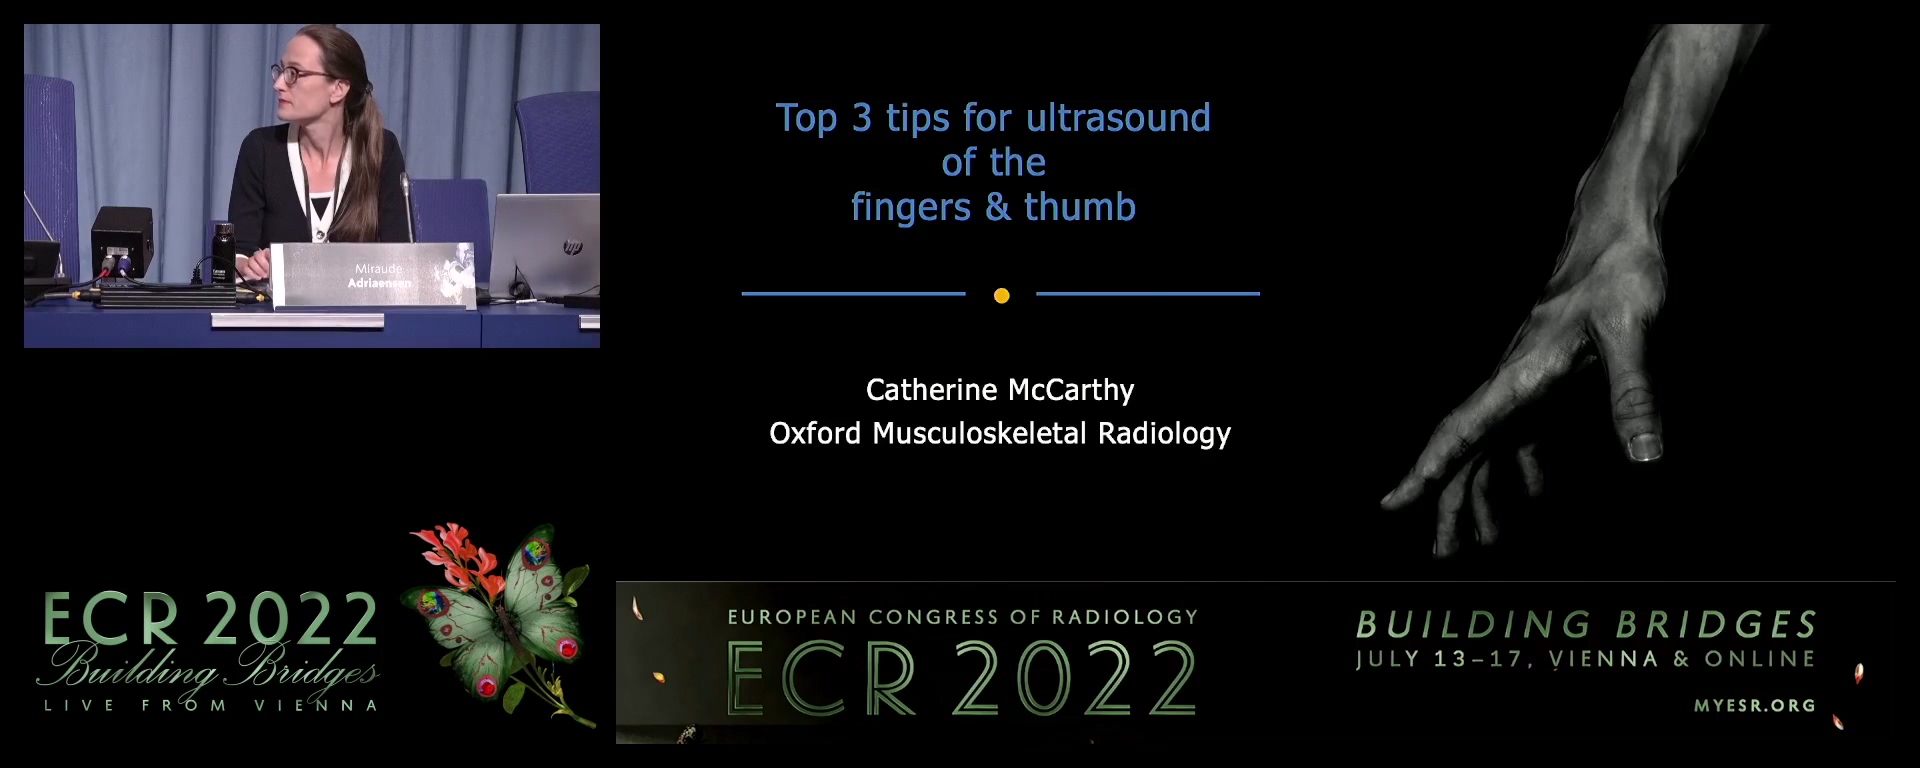 My top three tips for ultrasound of the fingers and thumb - Catherine McCarthy, Oxford / UK